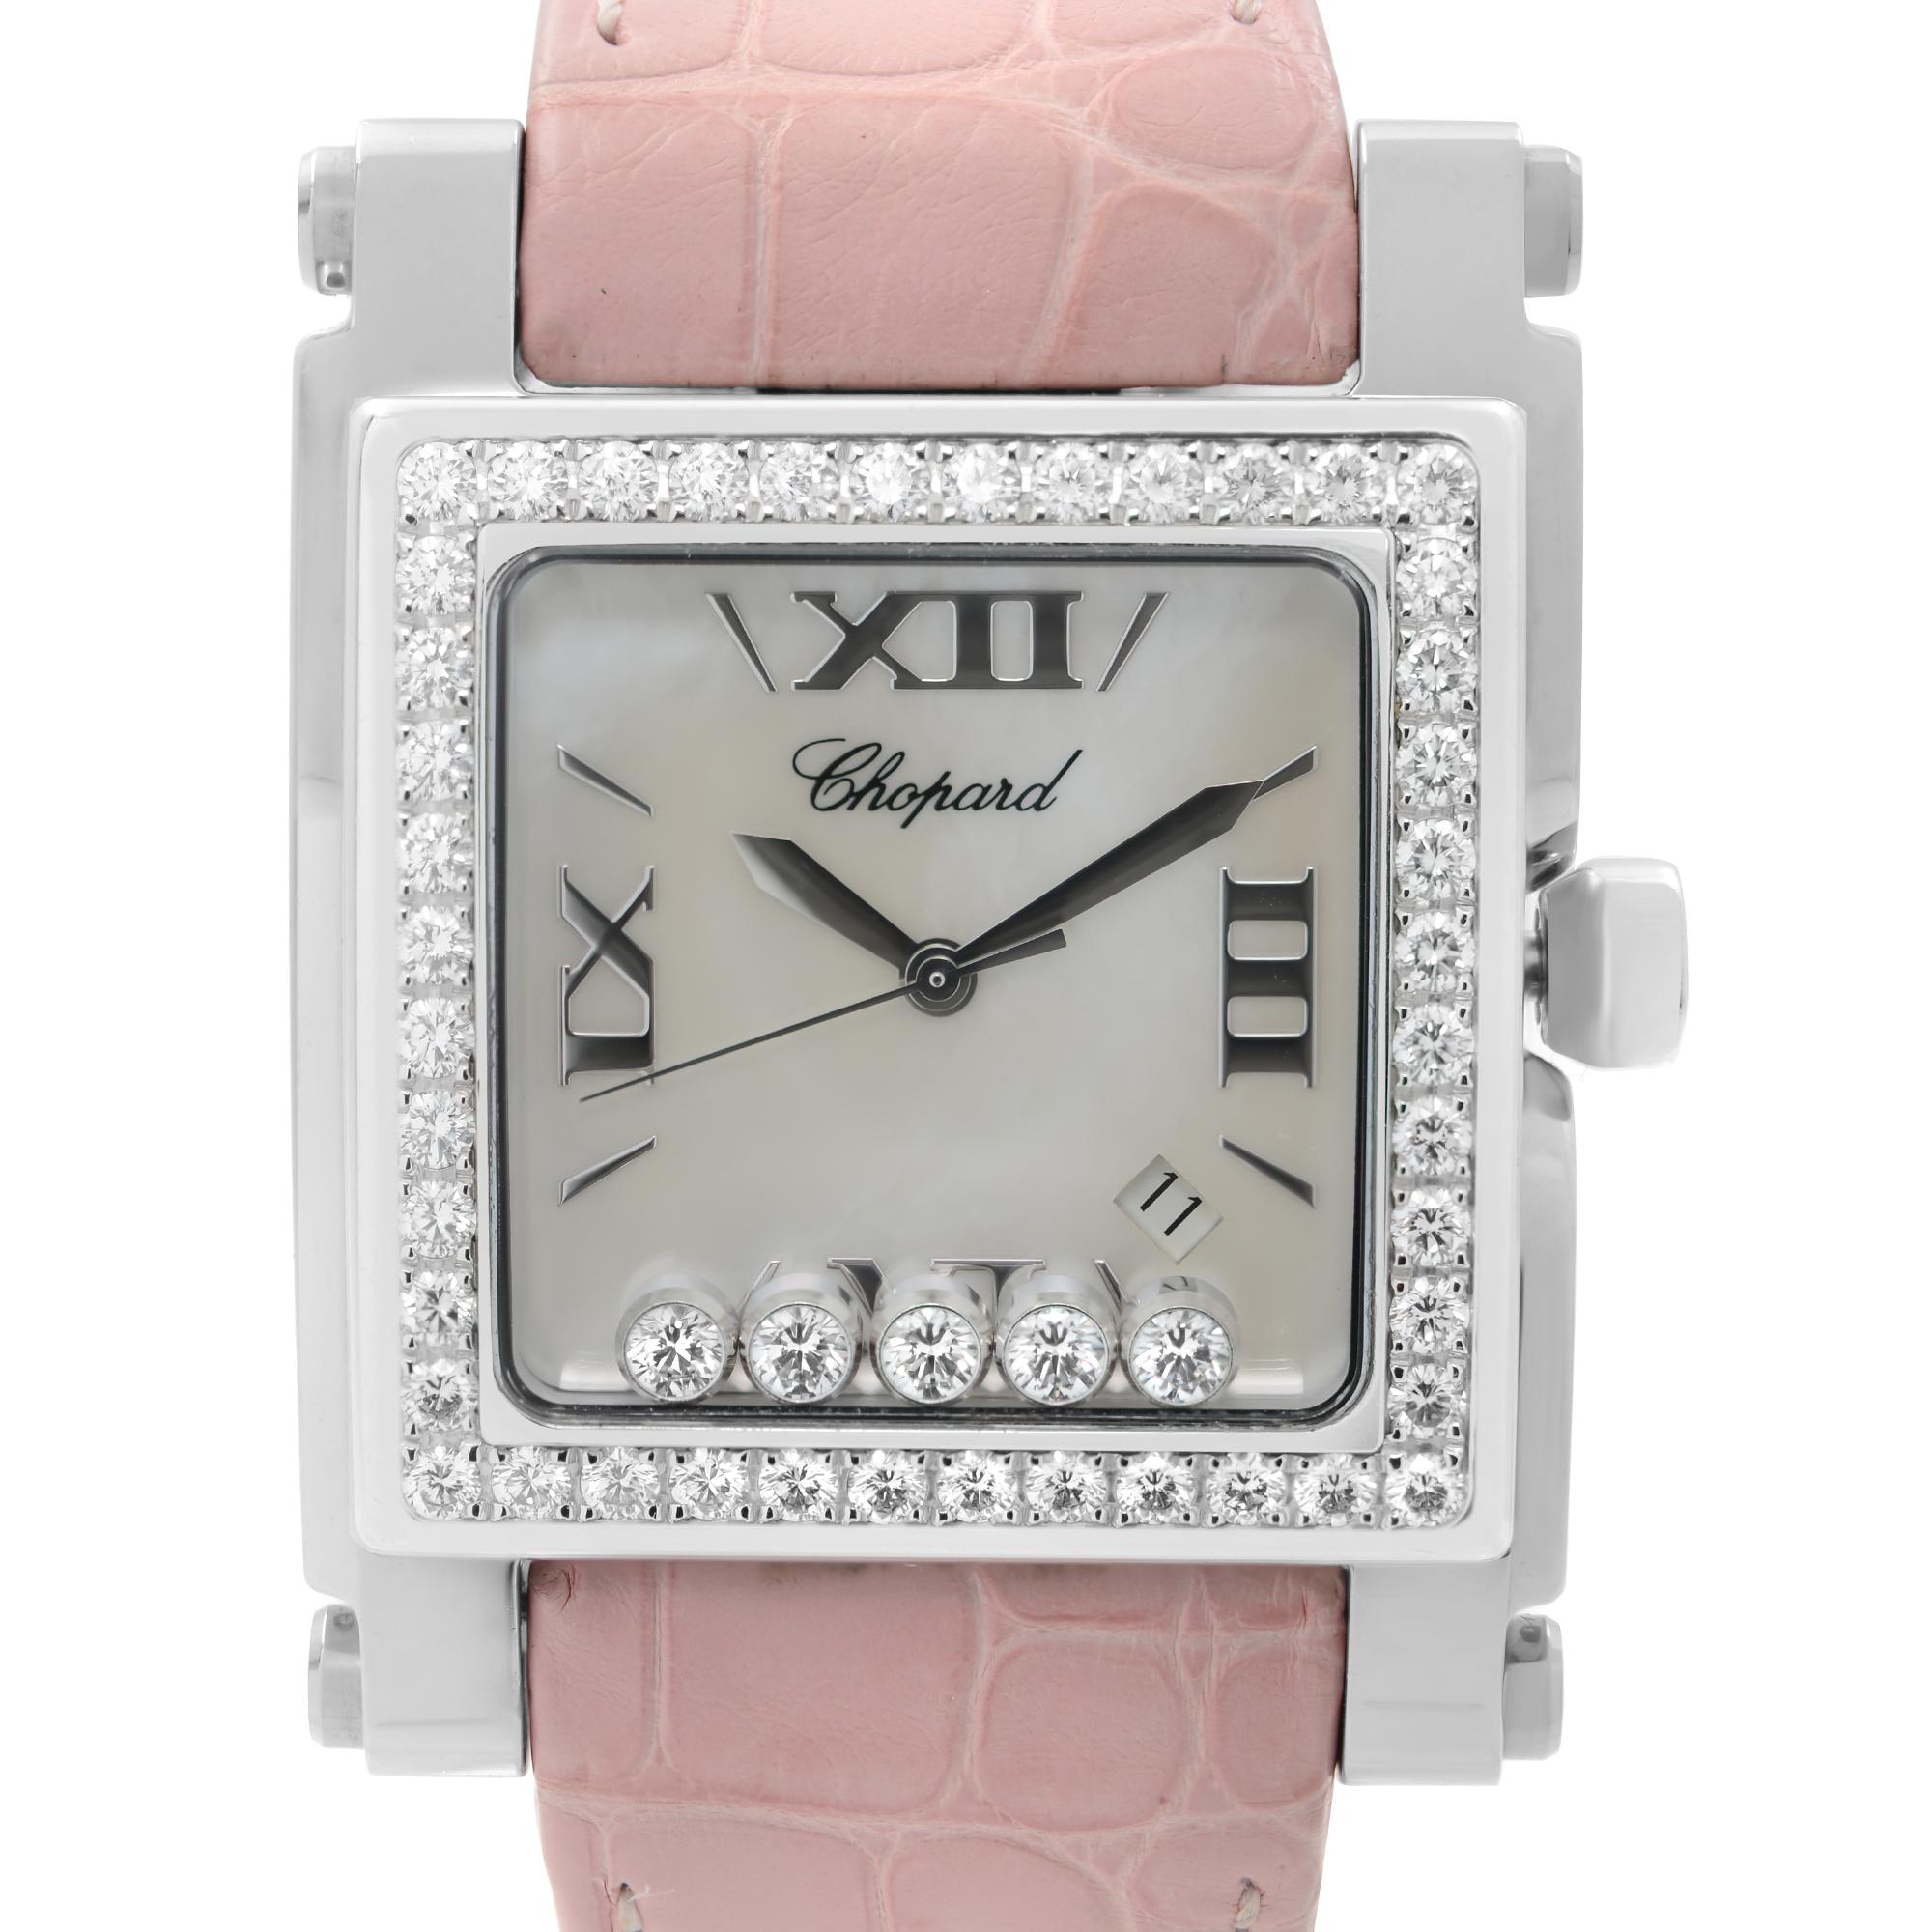 Pre Owned Chopard Happy Sport Stainless Steel Mother of Pearl Dial Pink Leather Strap Ladies Quartz Watch 28/8448-20. card dated 2017. This Beautiful Timepiece Features: Stainless Steel Case with a Pink leather Strap, Fixed Diamond Embedded